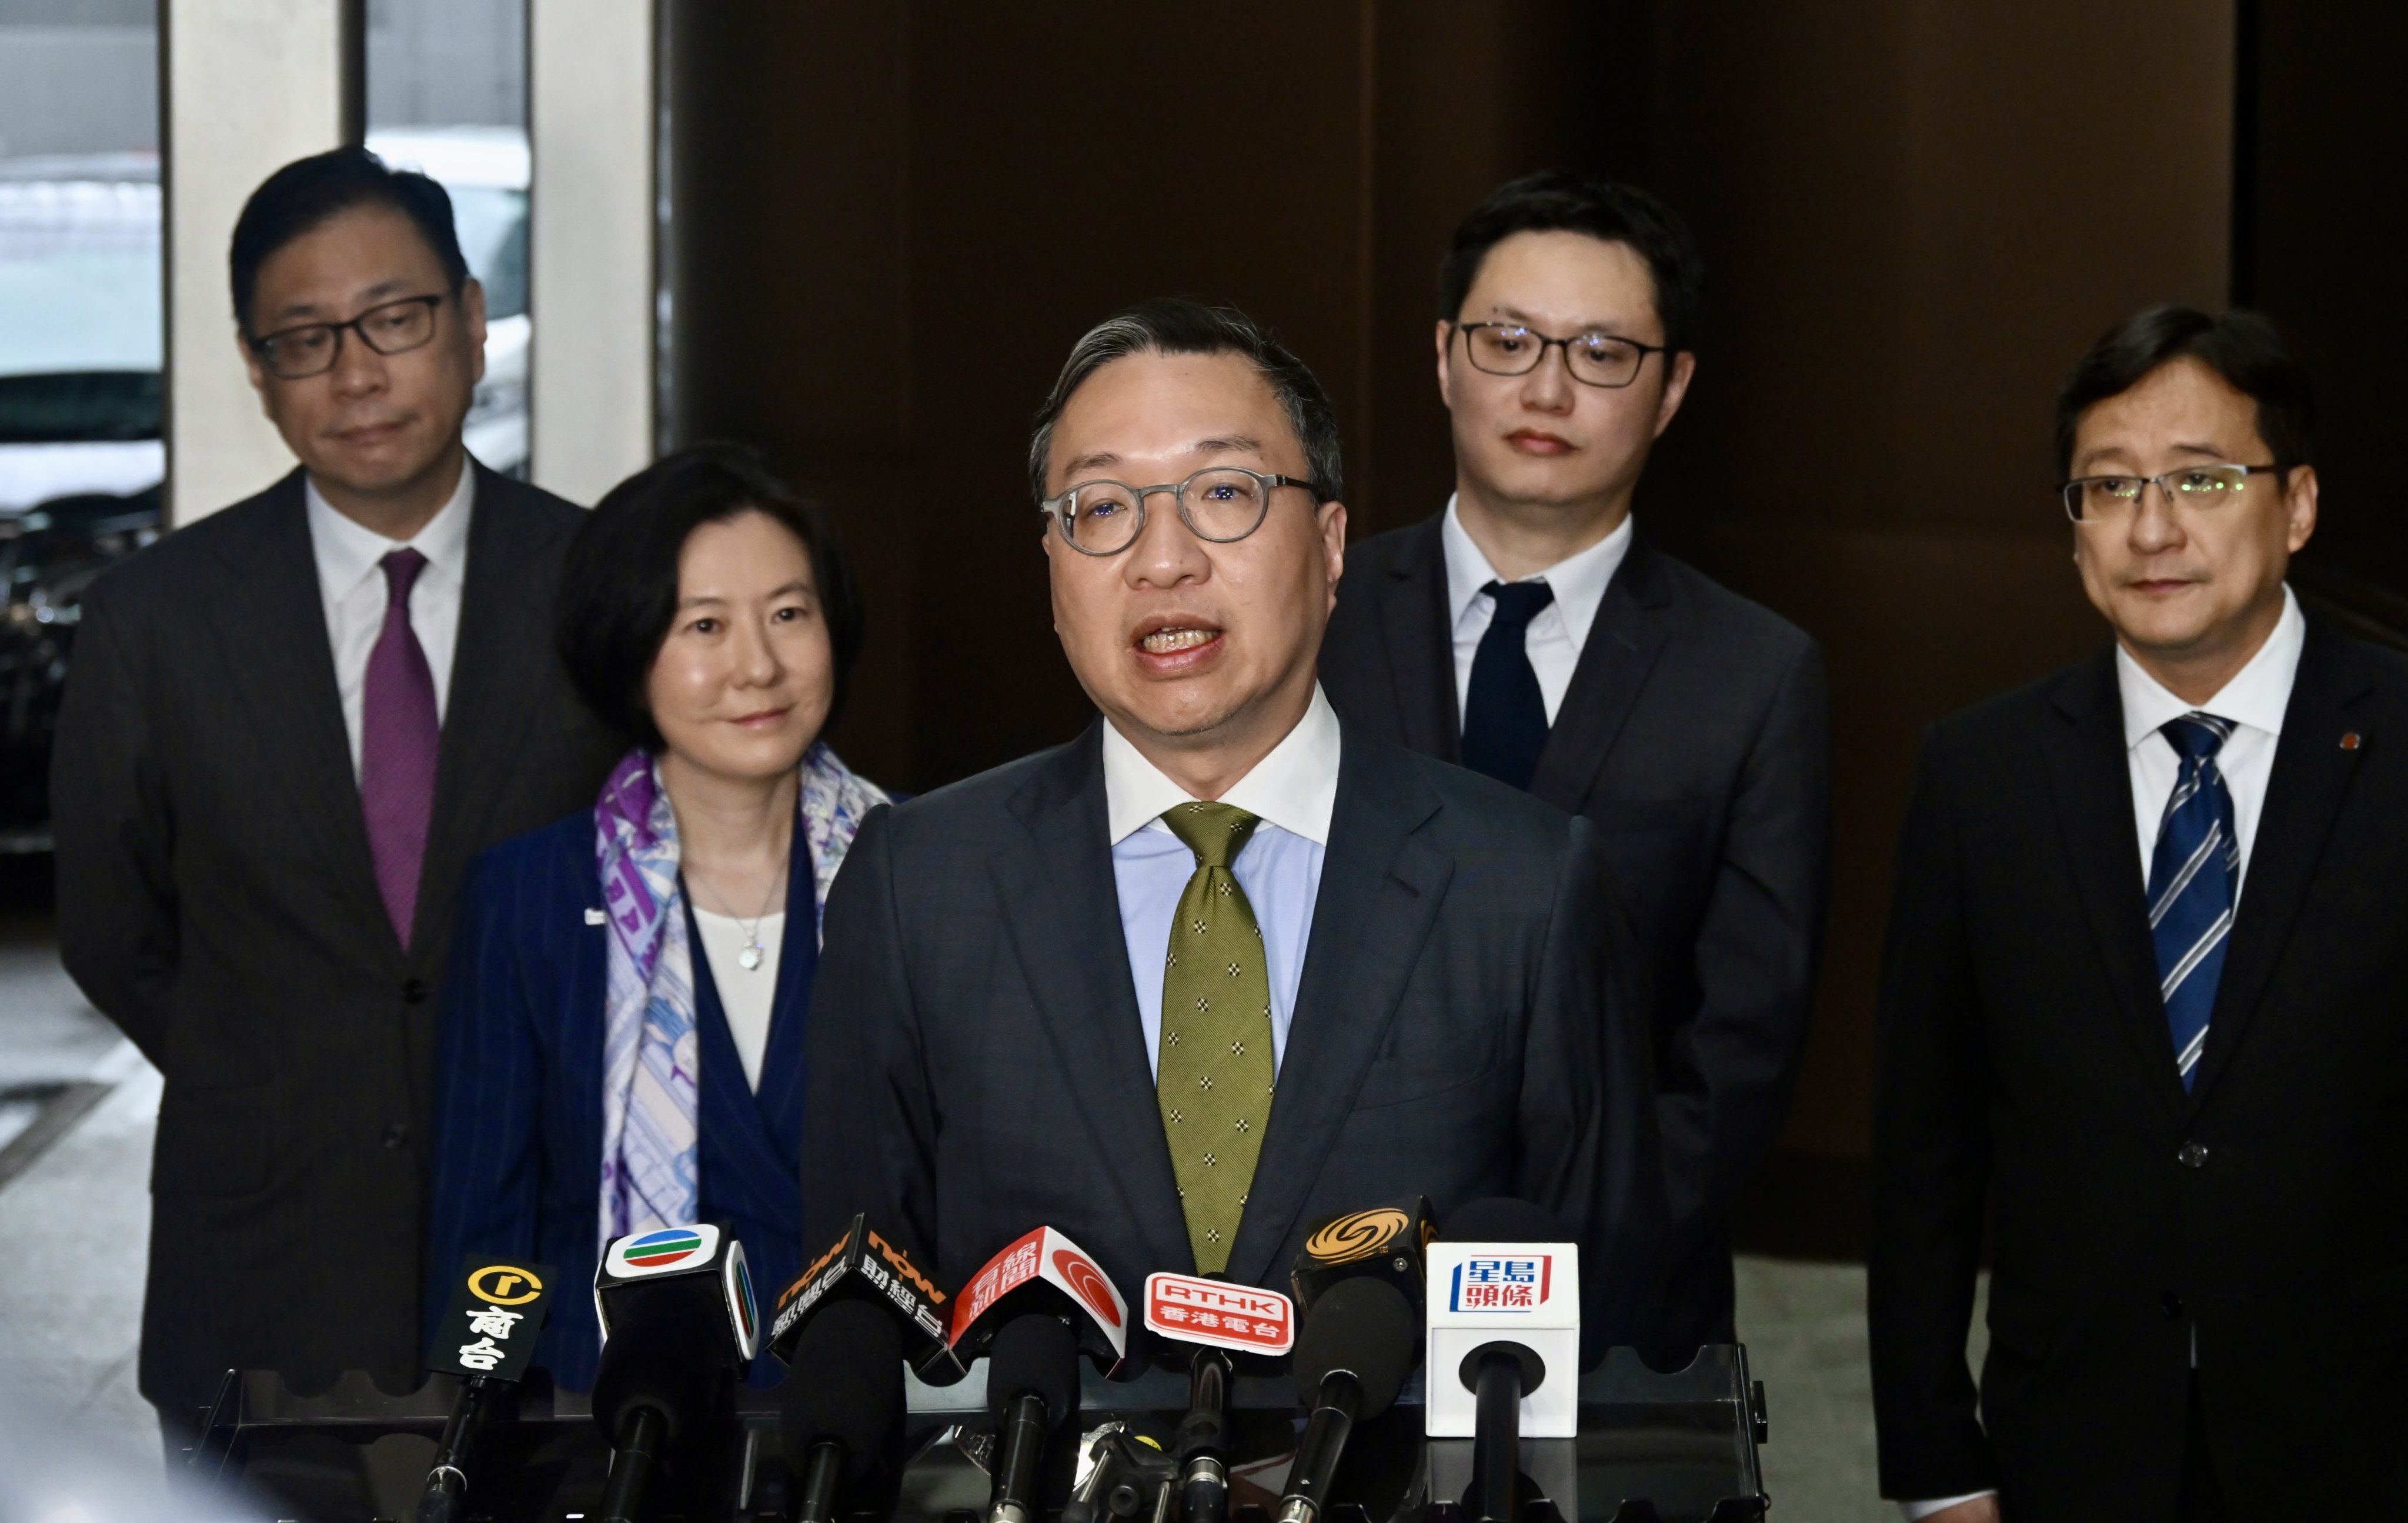 Justice minister Paul Lam (centre) says the US threats of sanctions will not affect his work. Photo: Handout